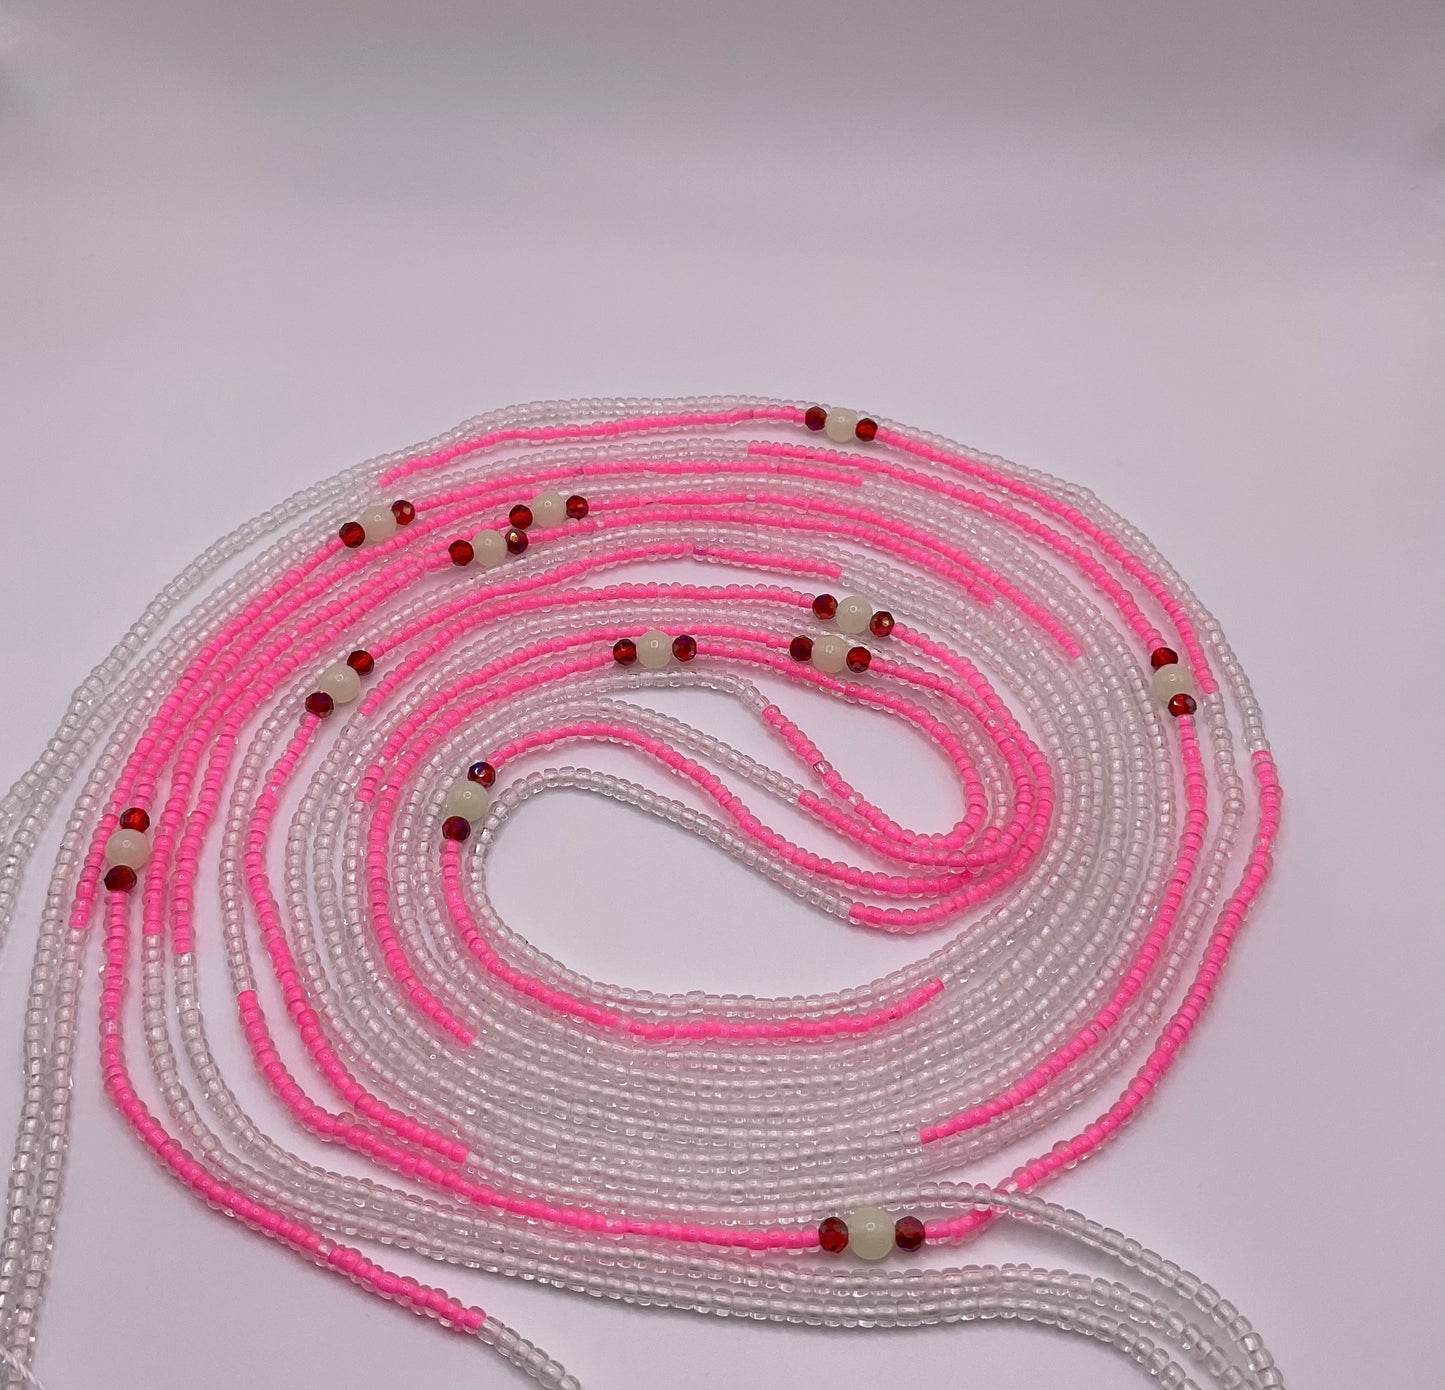 Glow in pink waist beads